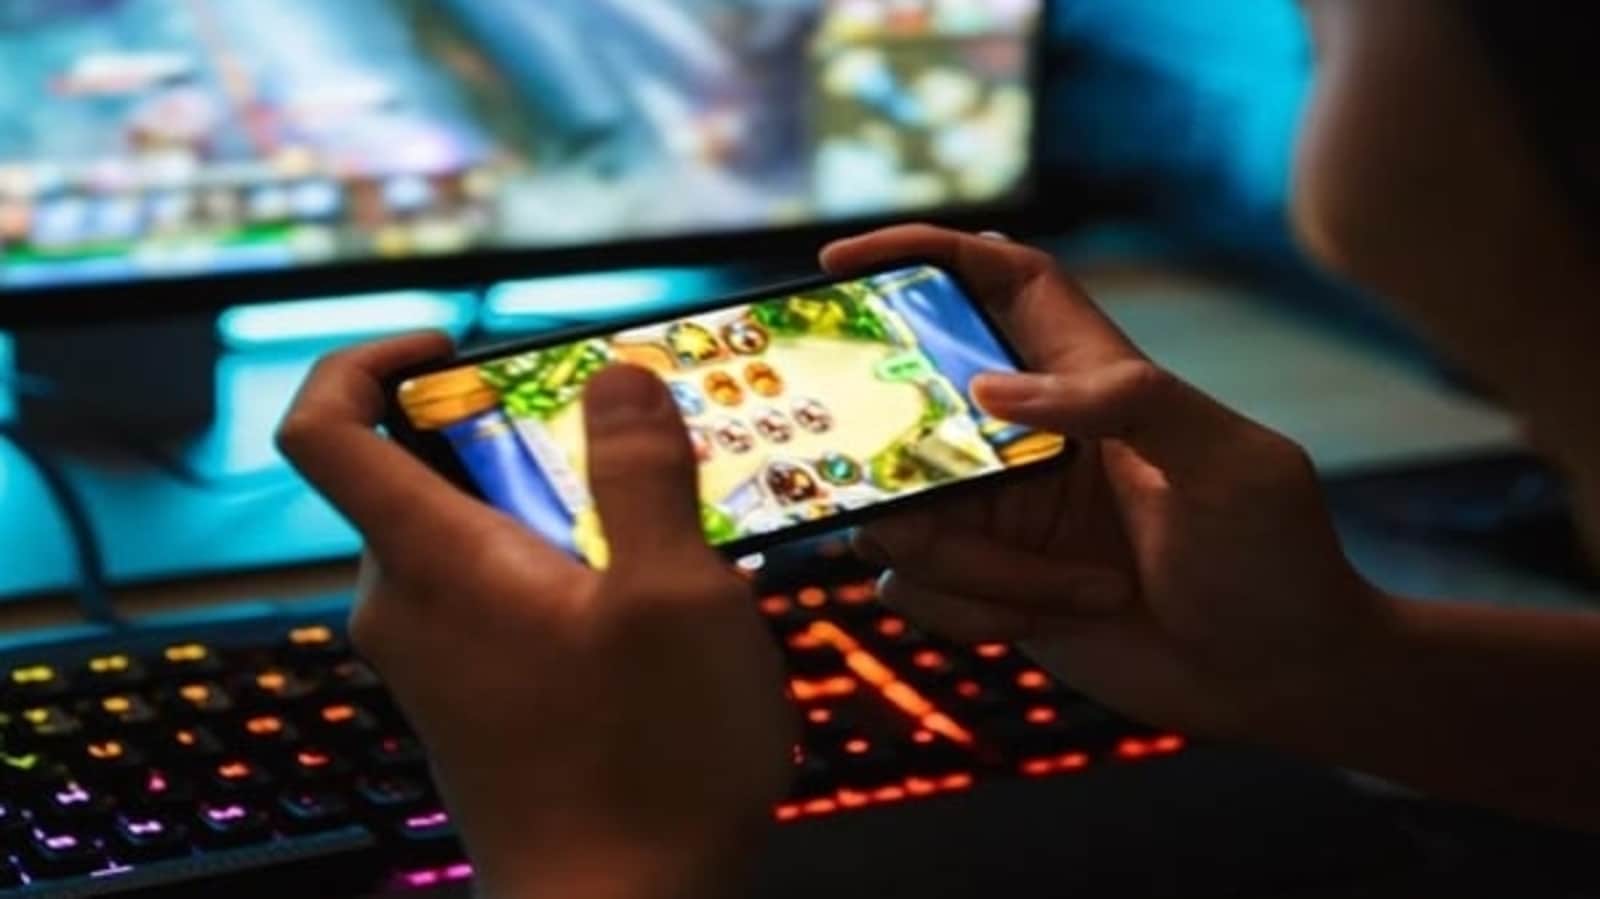 govt-plans-uniform-tax-for-online-gaming-latest-news-india